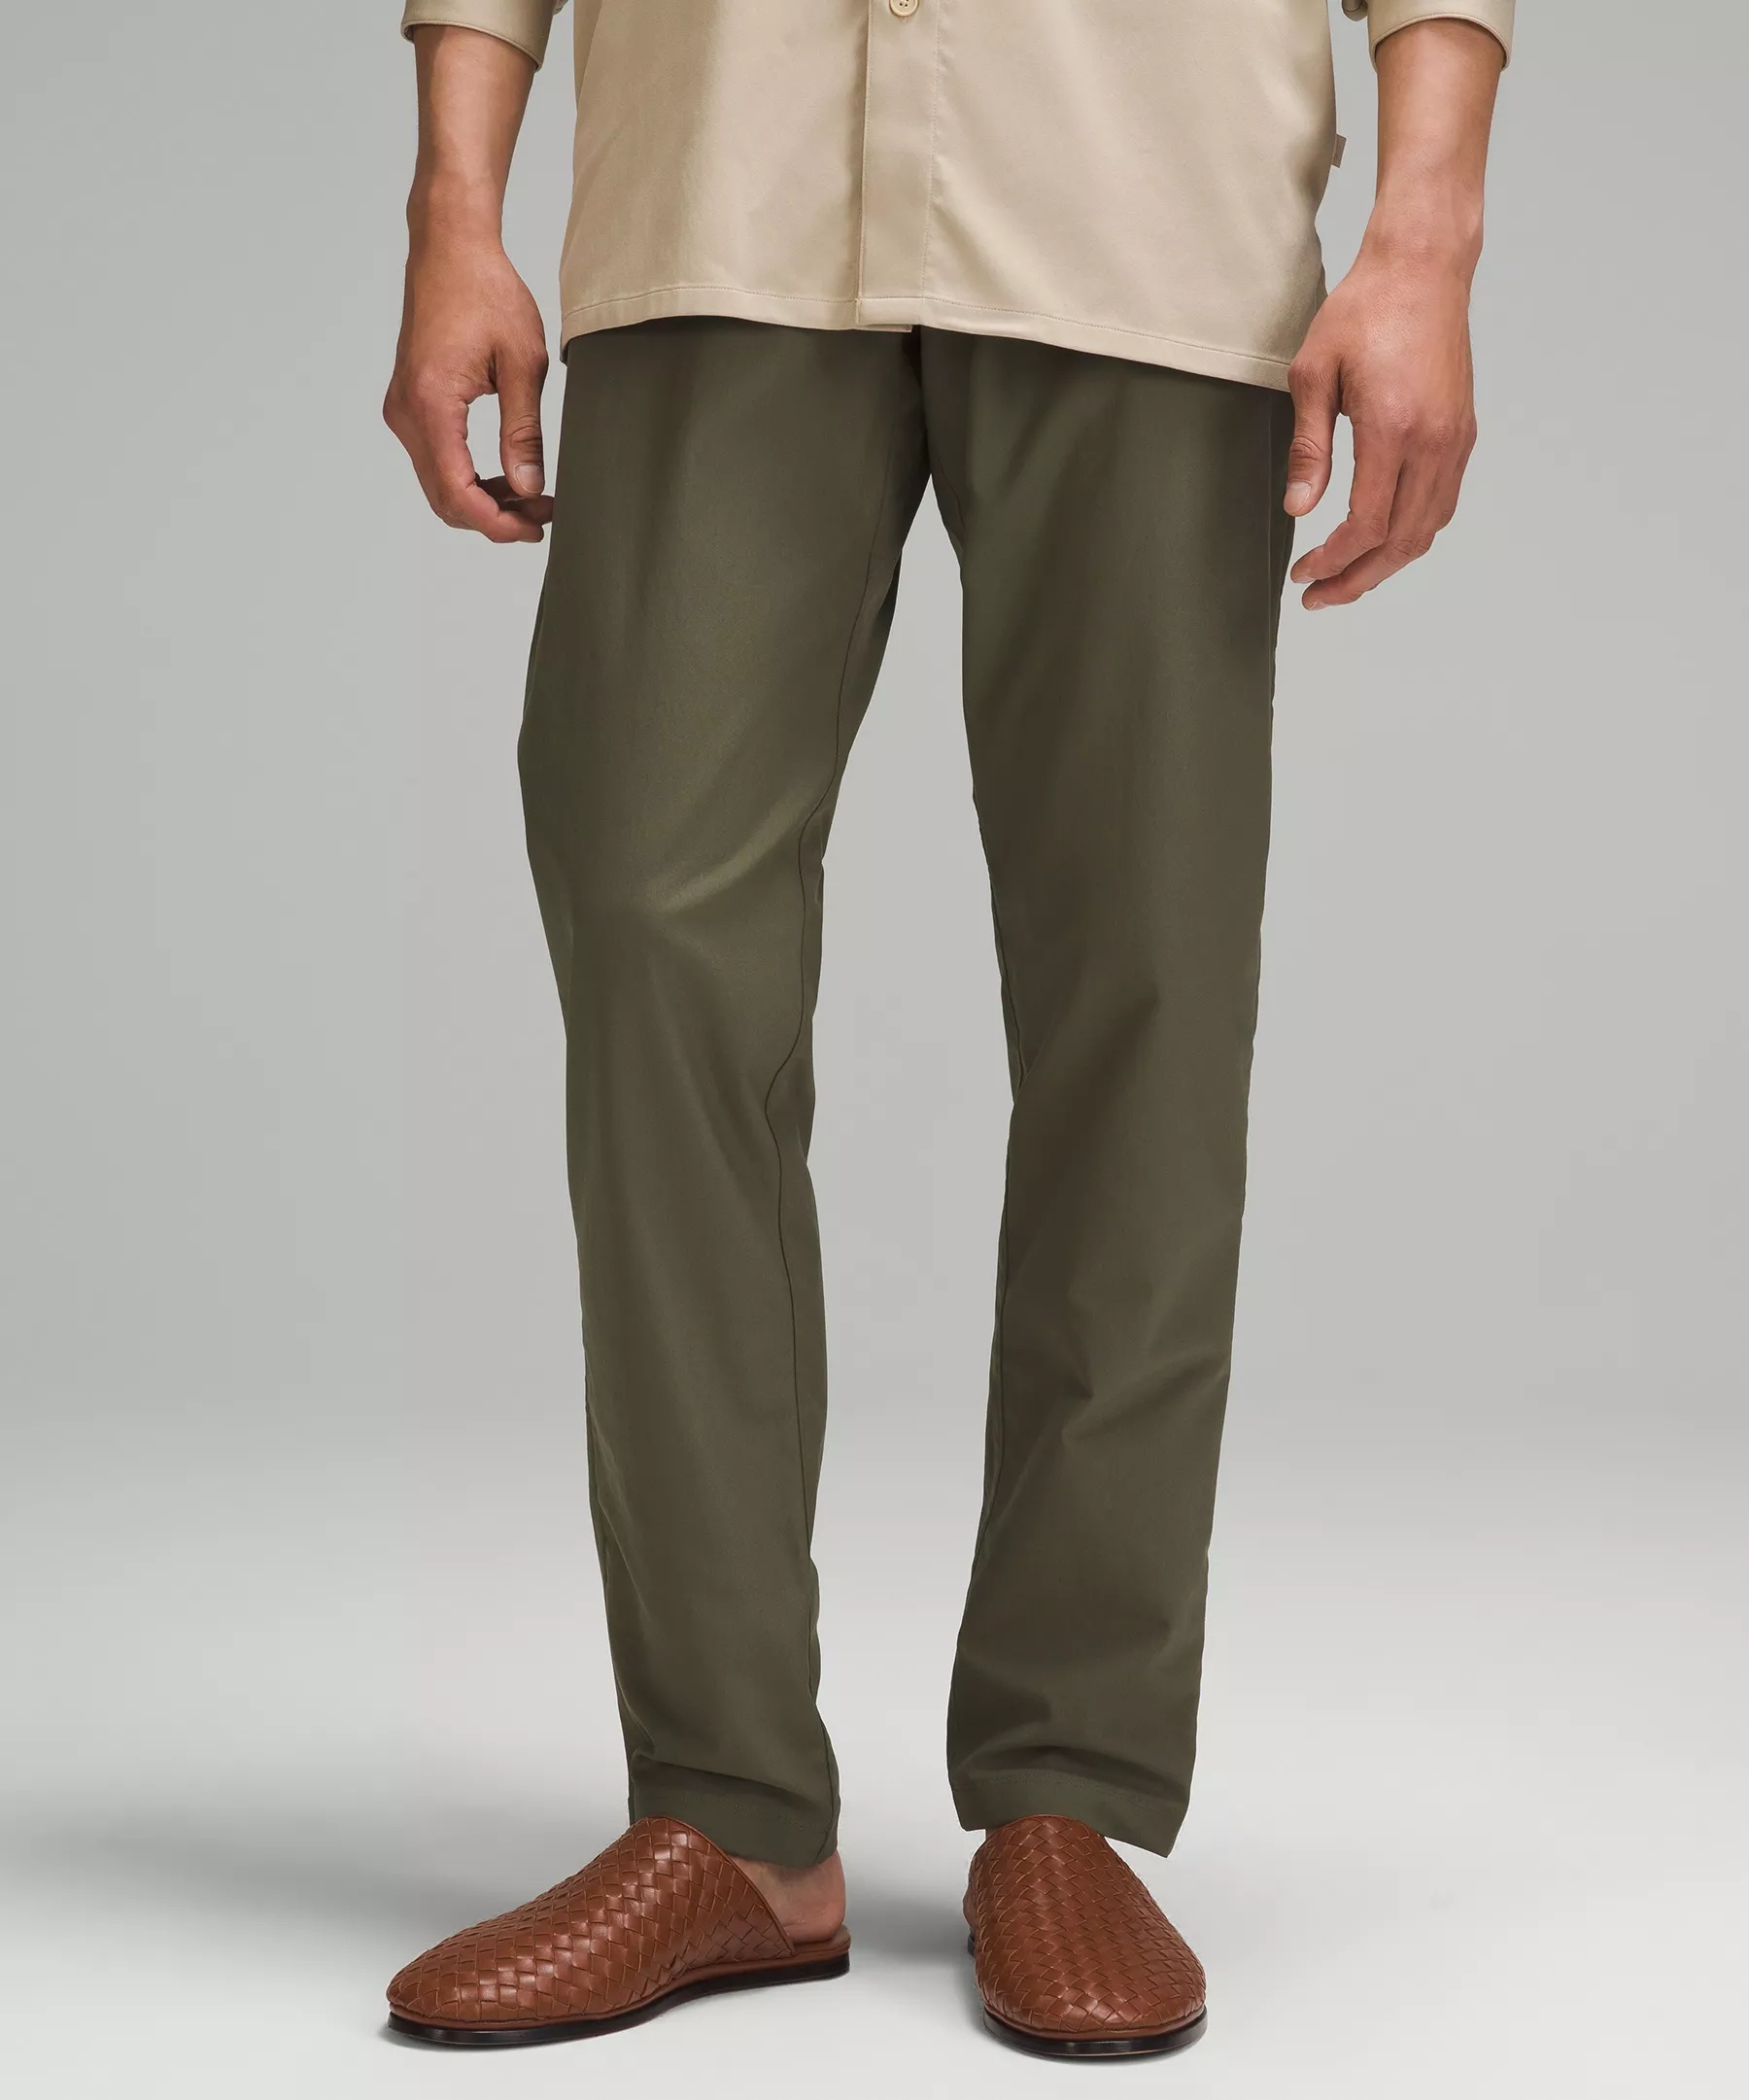 ABC Classic-Fit Trouser 34"L *Smooth Twill - 1